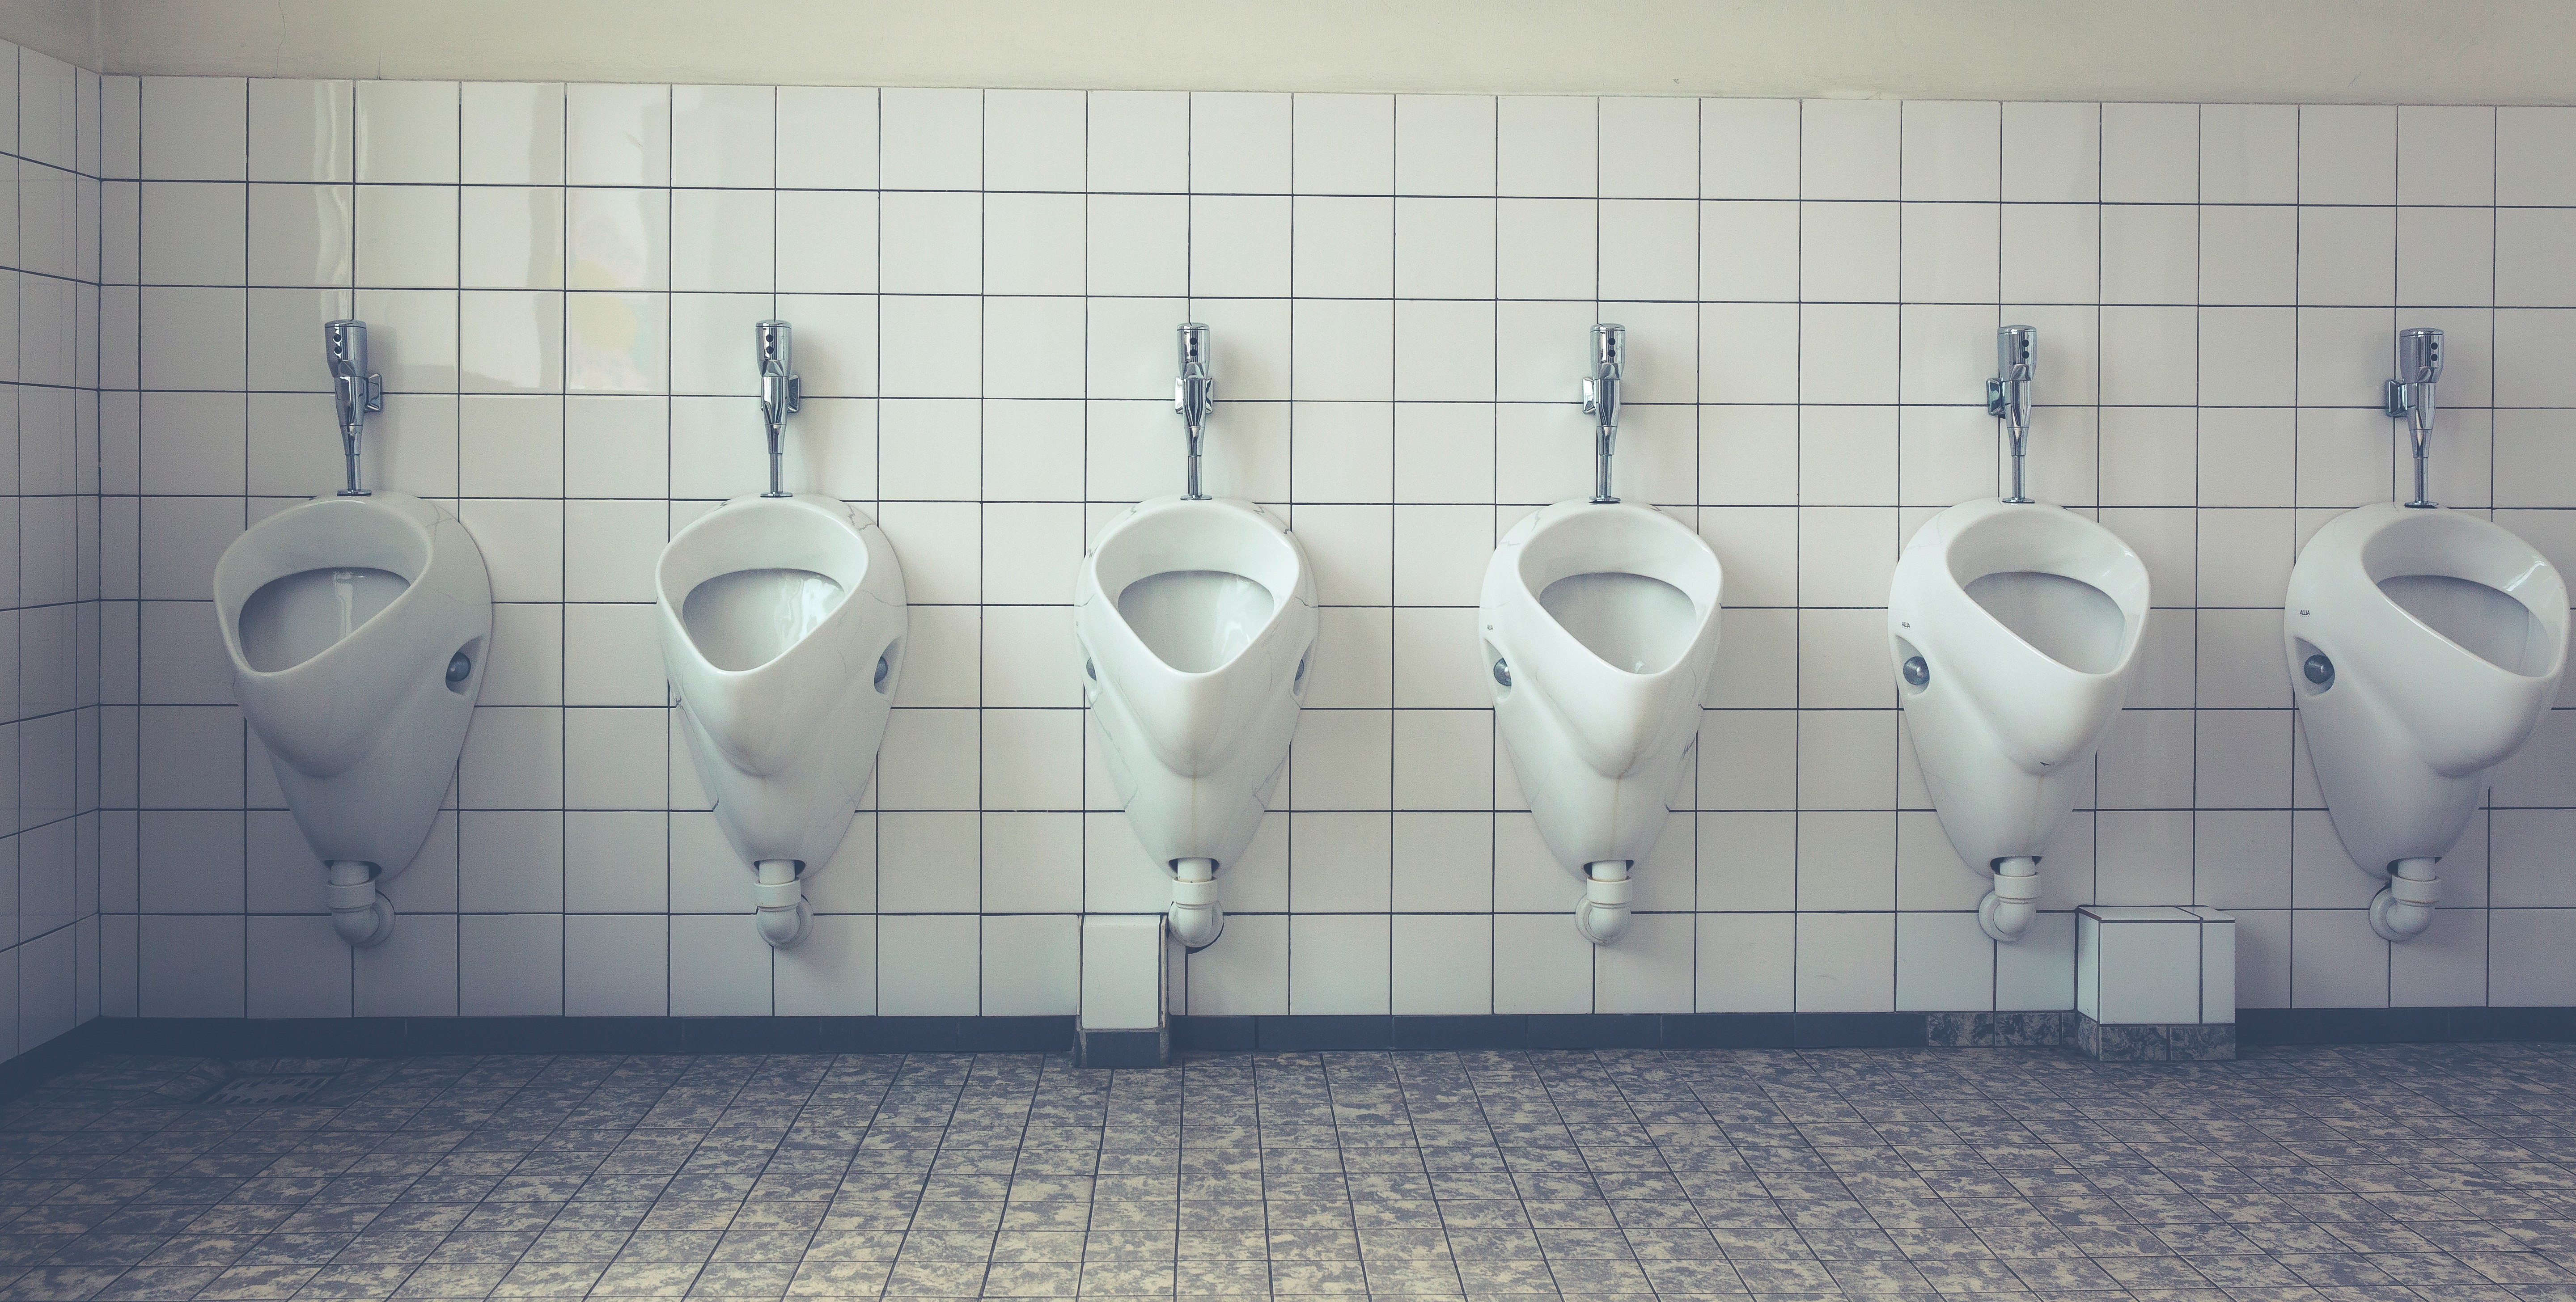 What Urinal Are You After?